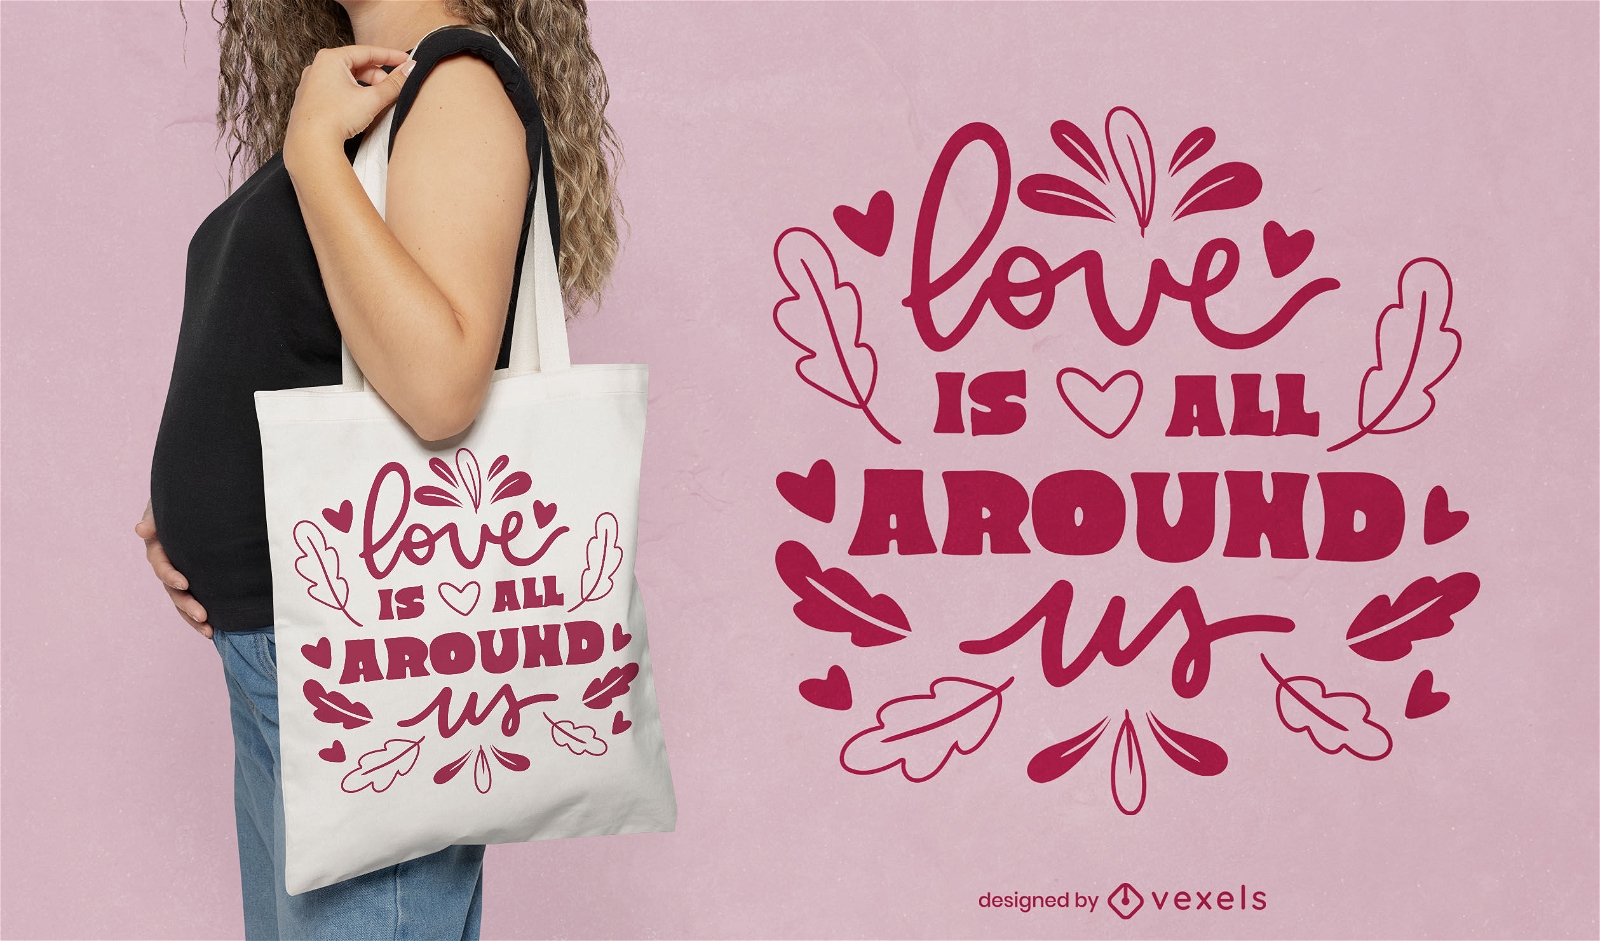 Love all around us thanksgiving tote bag design